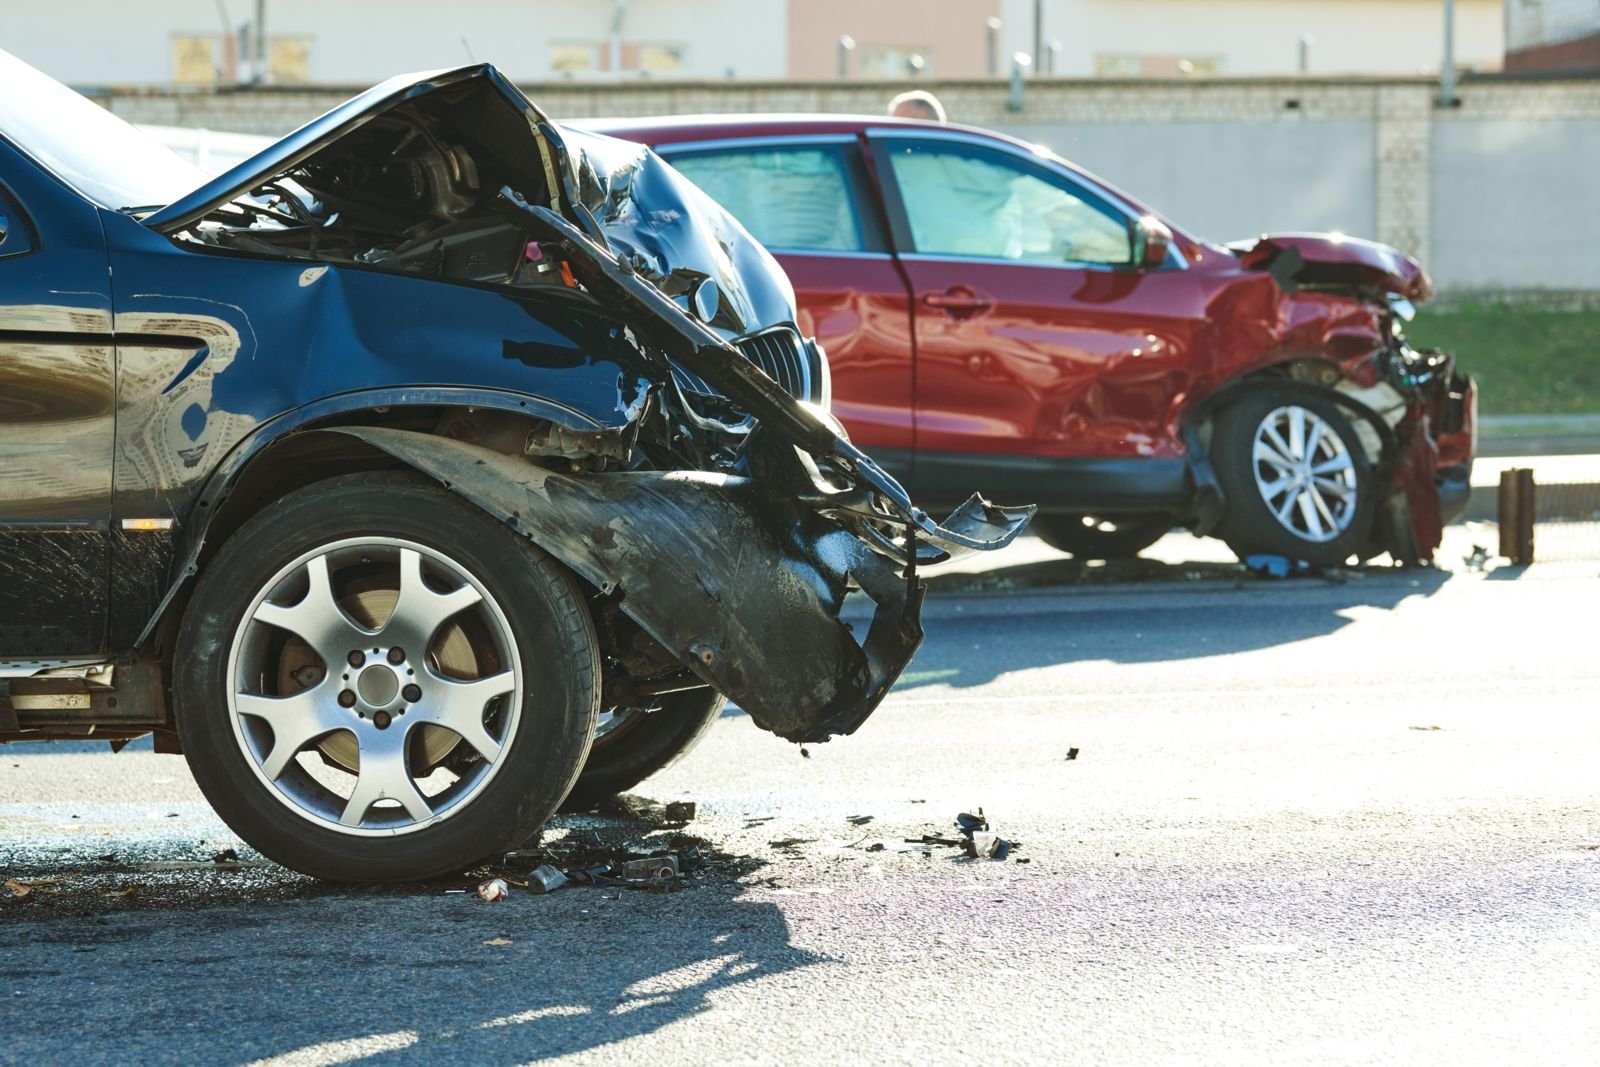 Does Insurance Company Report Accident to DMV?